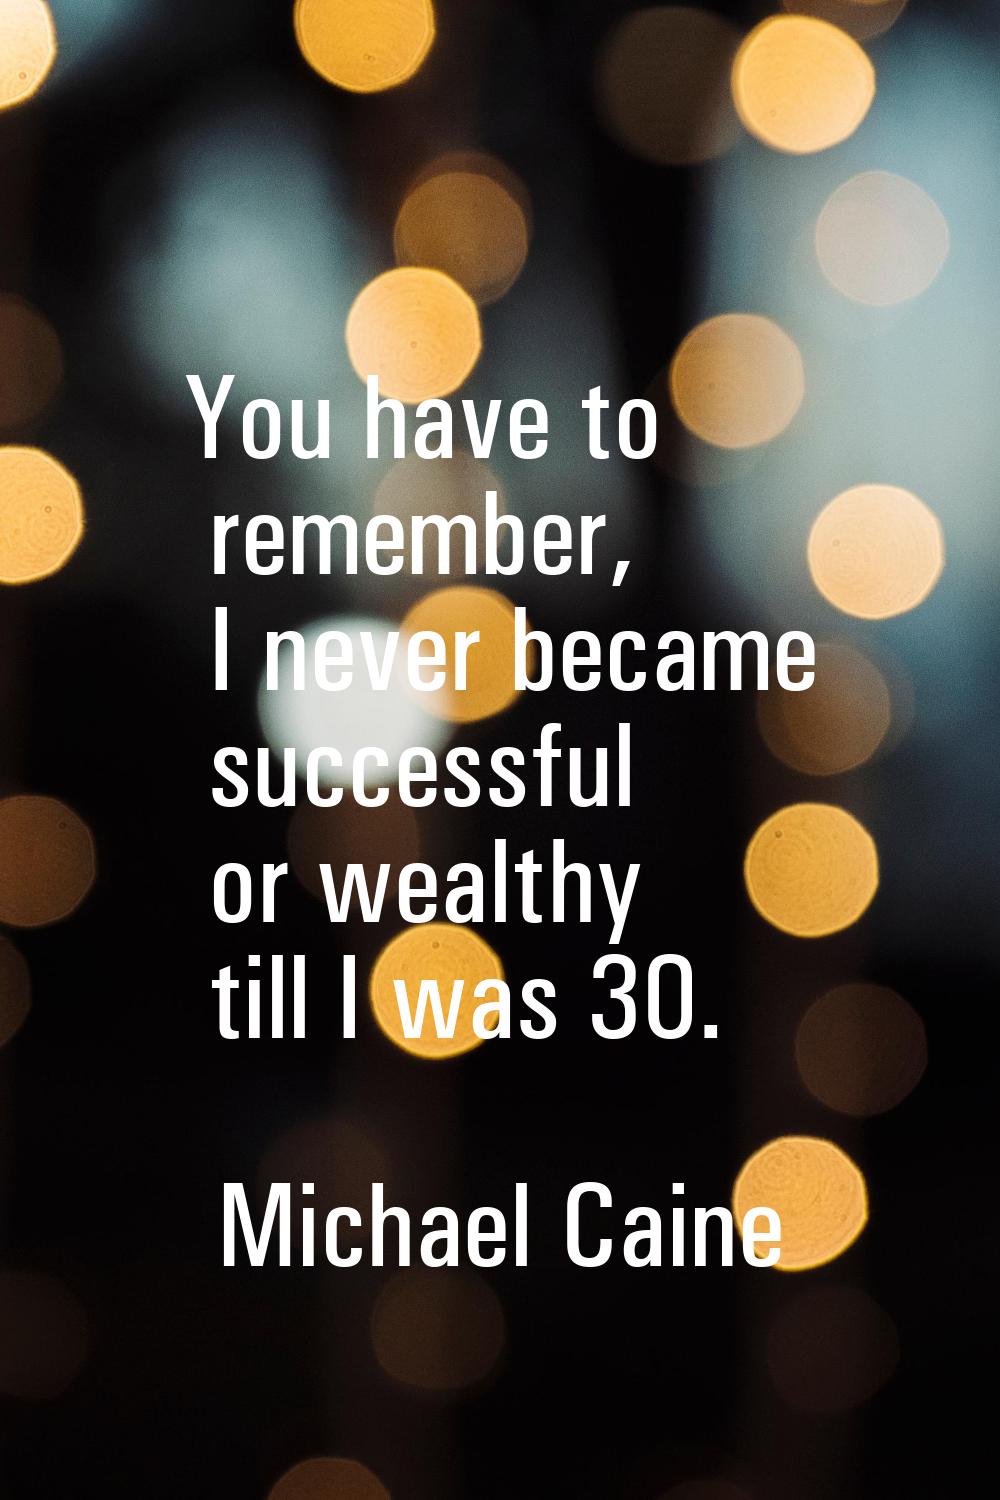 You have to remember, I never became successful or wealthy till I was 30.